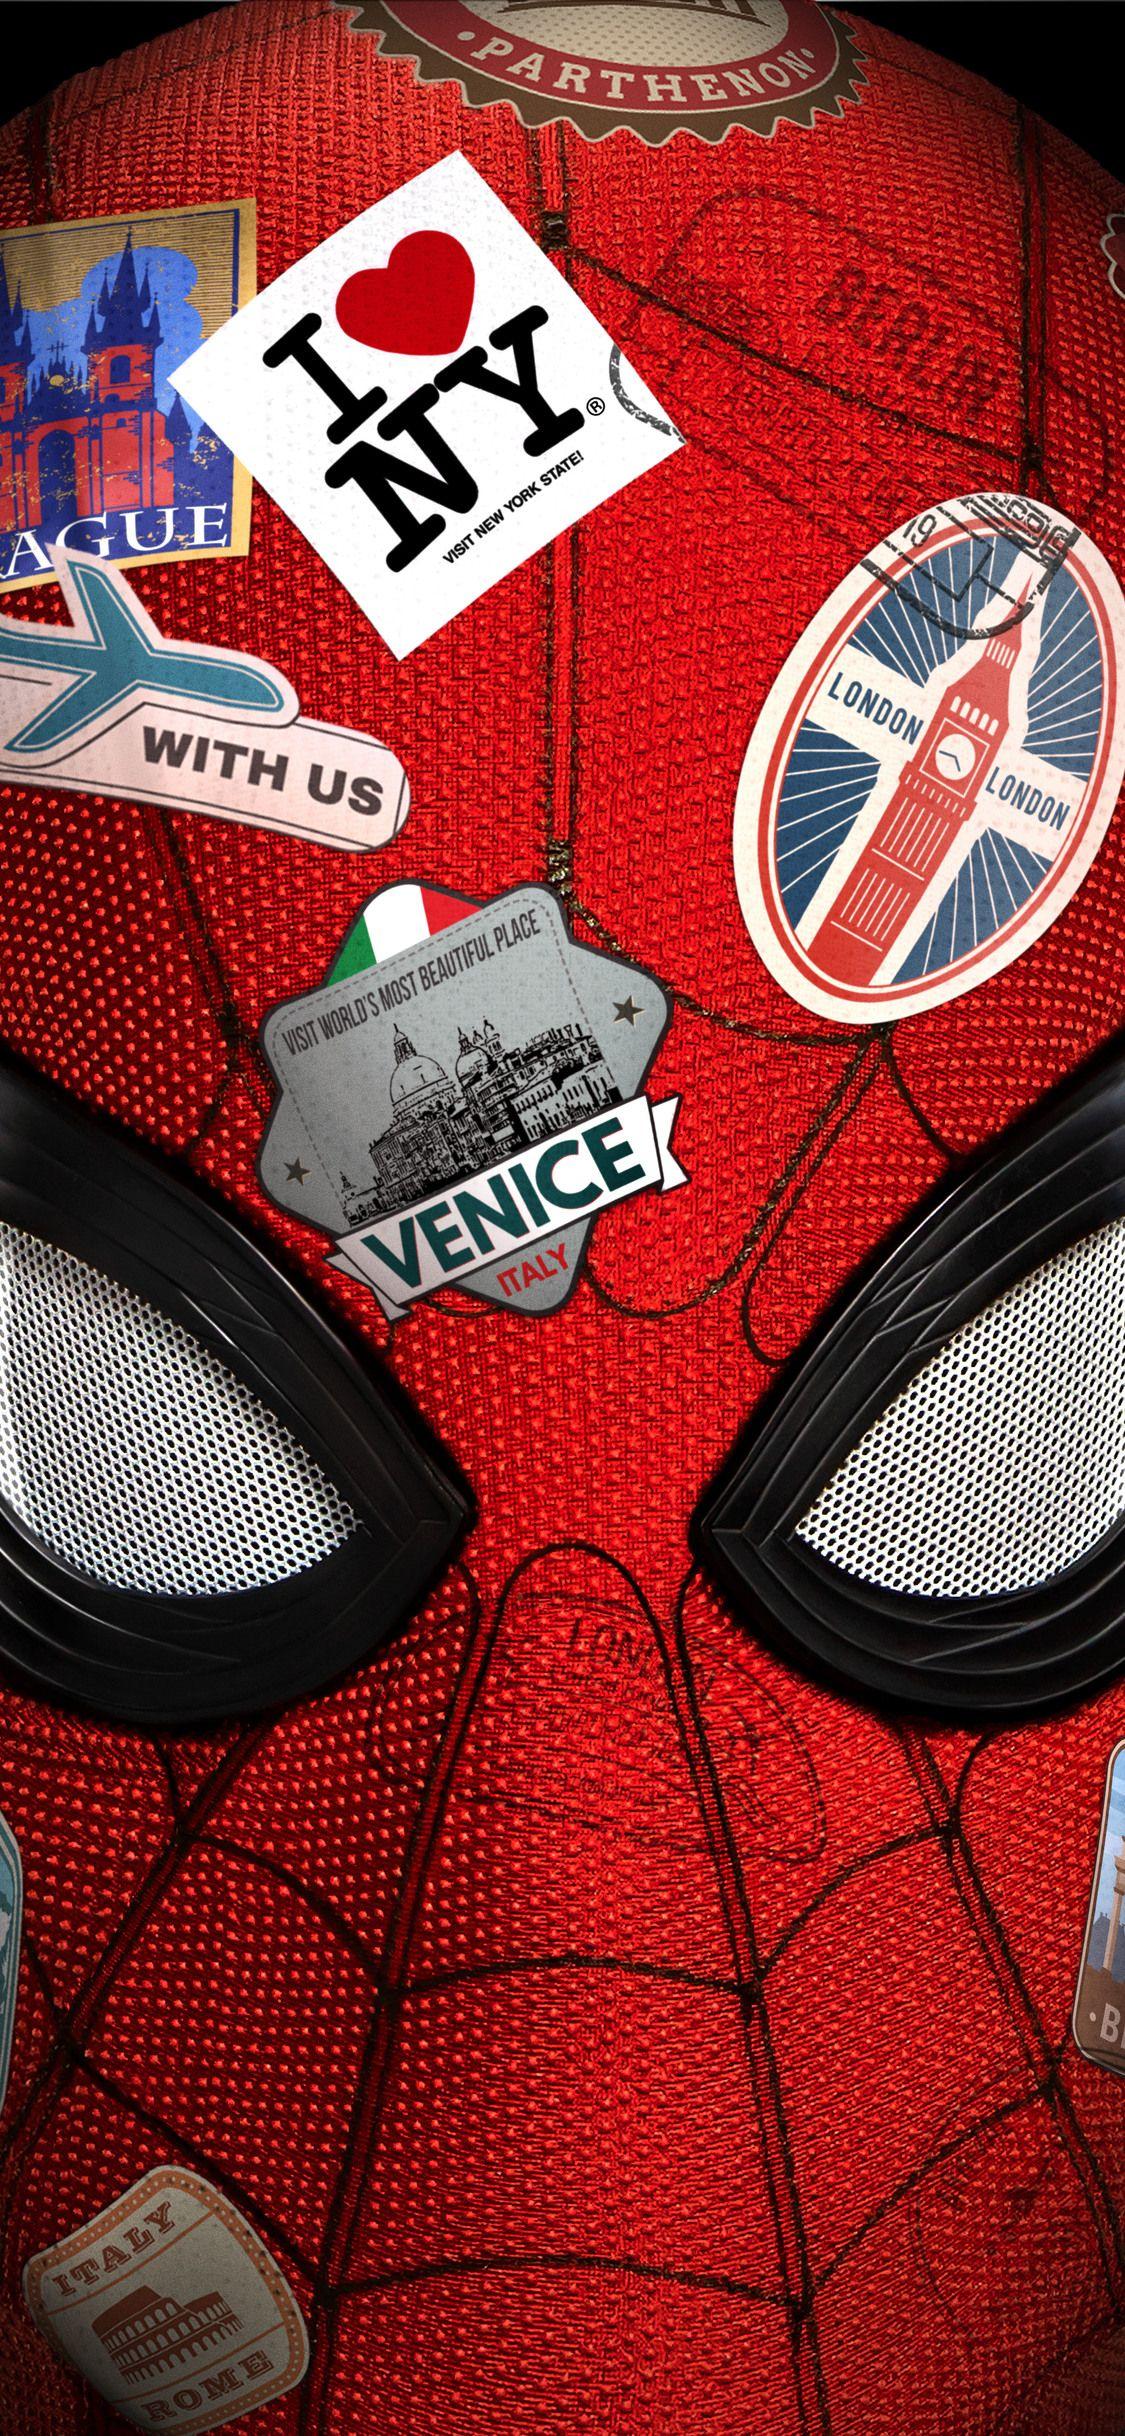 Spider Man Far From Home Movie iPhone XS, iPhone iPhone X HD 4k Wallpaper, Image, Backgroun. Marvel iphone wallpaper, Superhero wallpaper, Spiderman